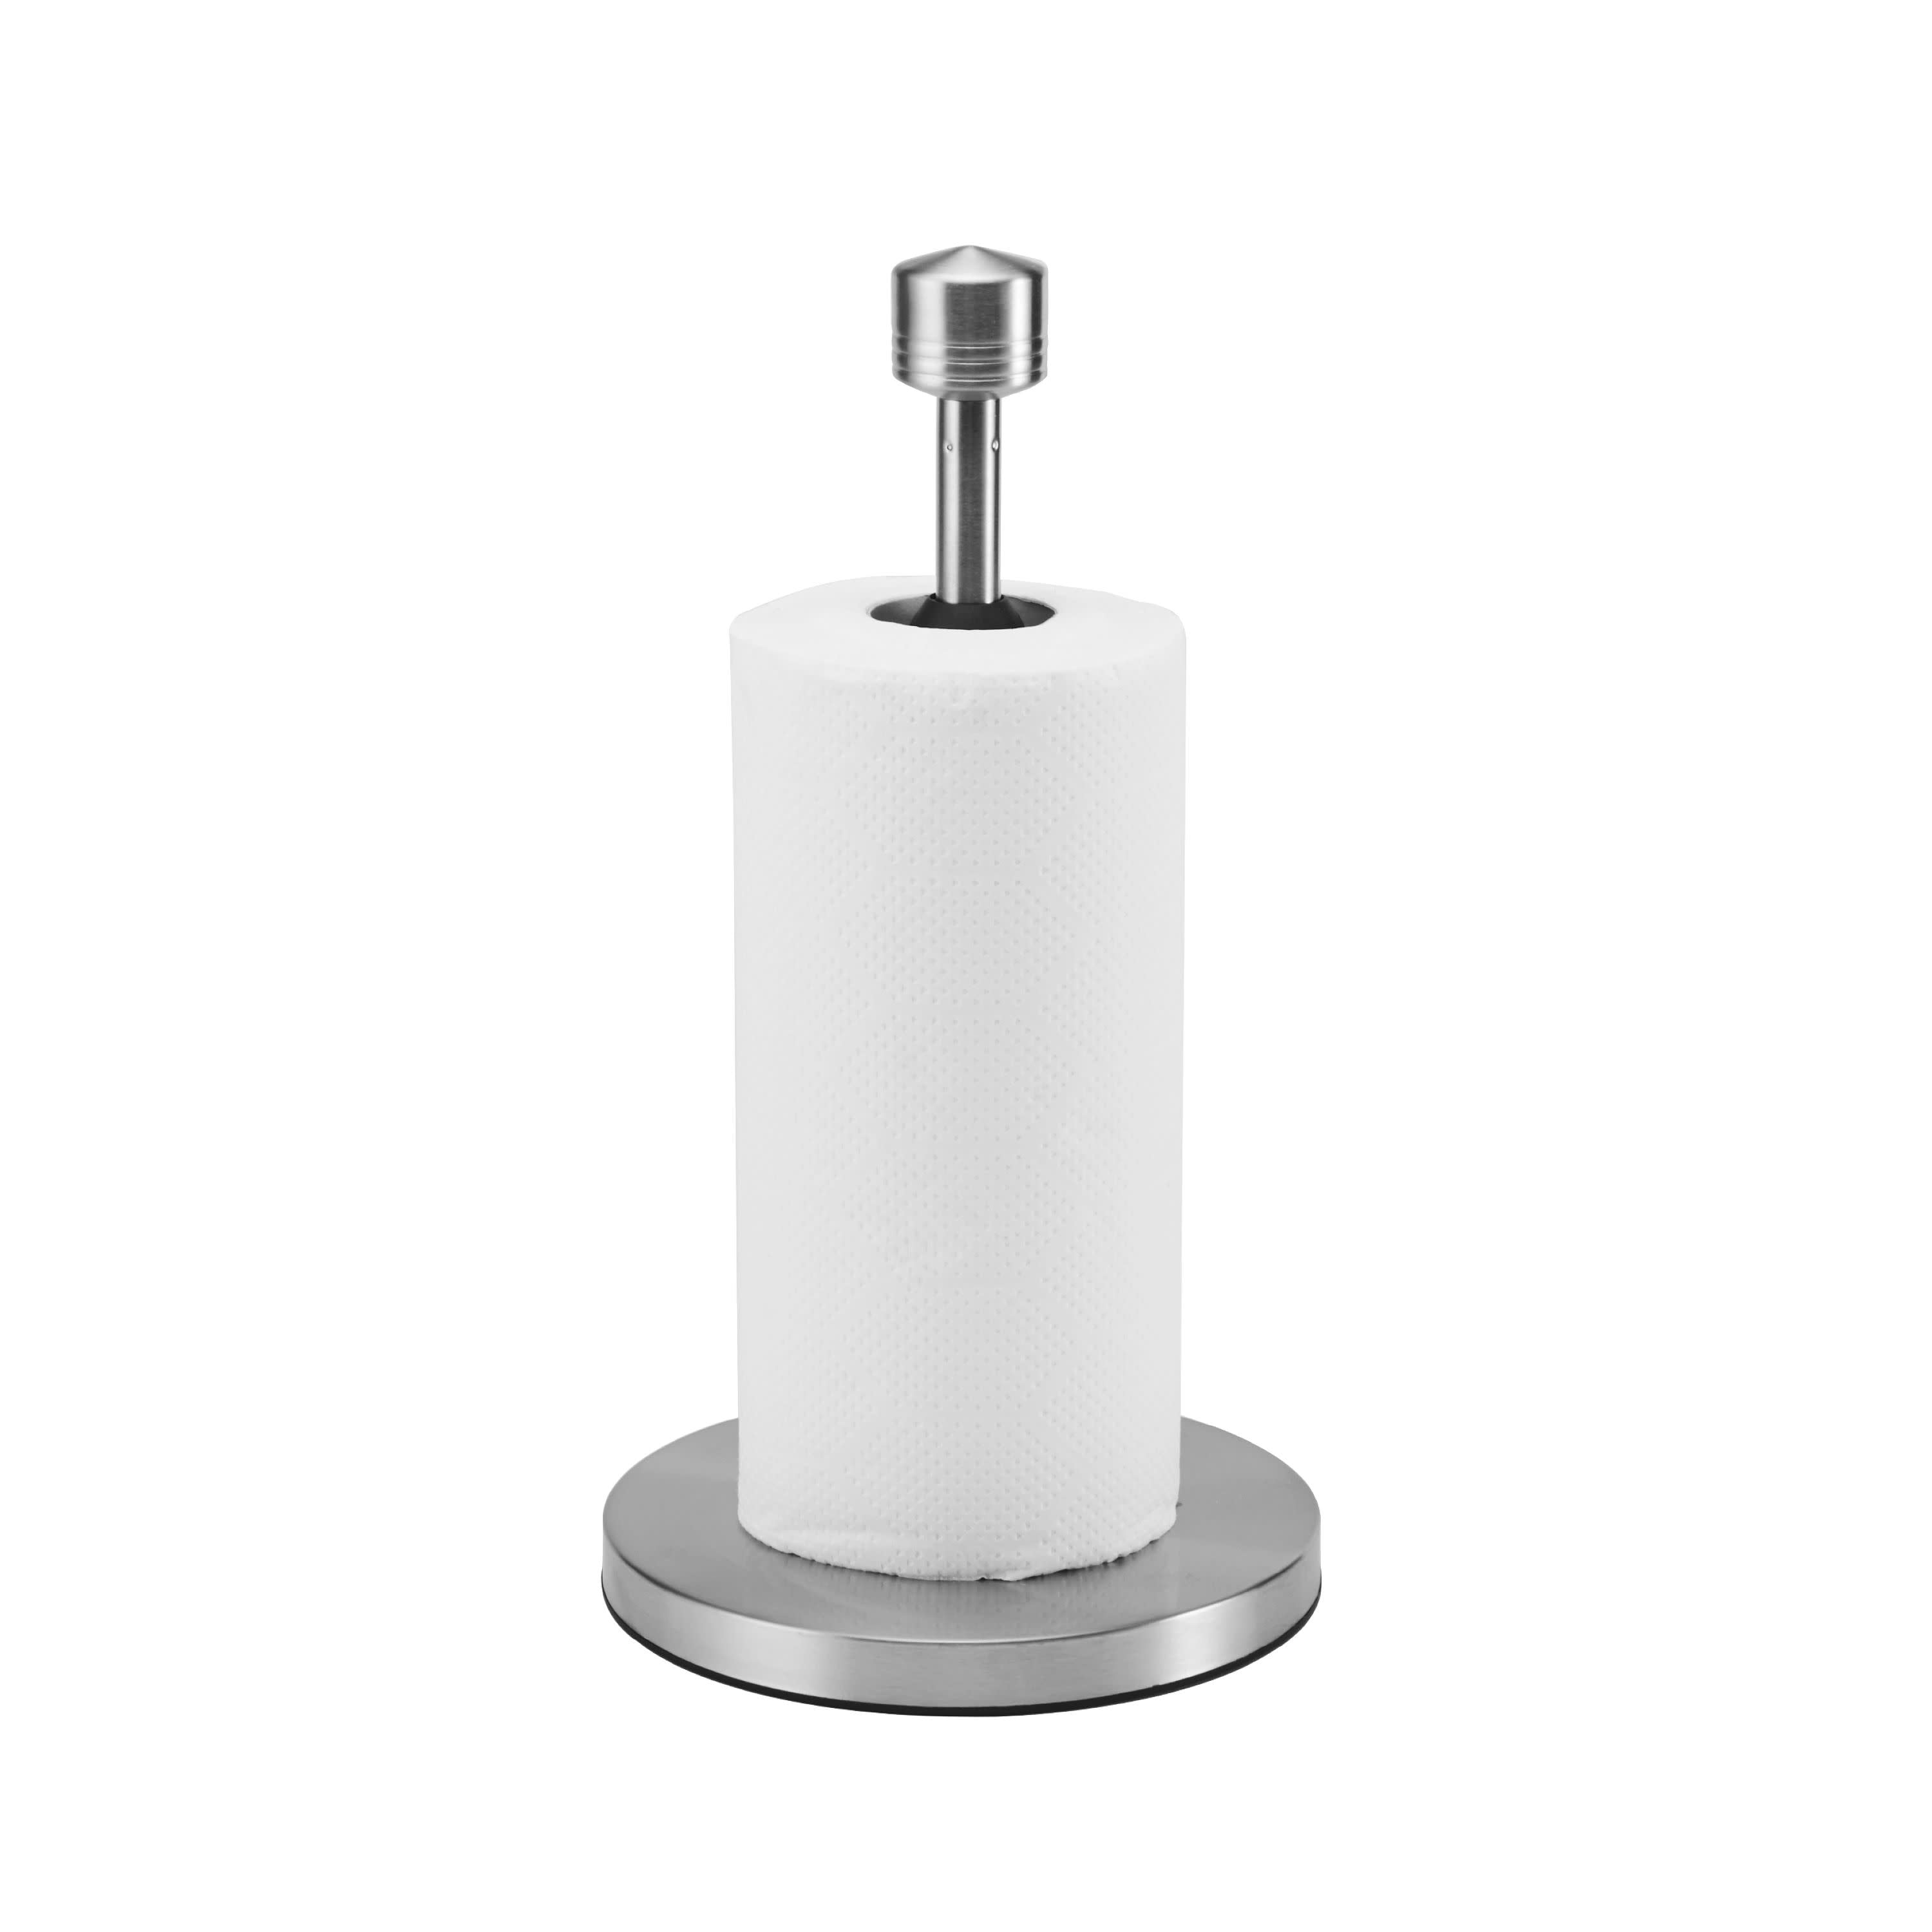 Ratcheting paper towel holder by Ian-__